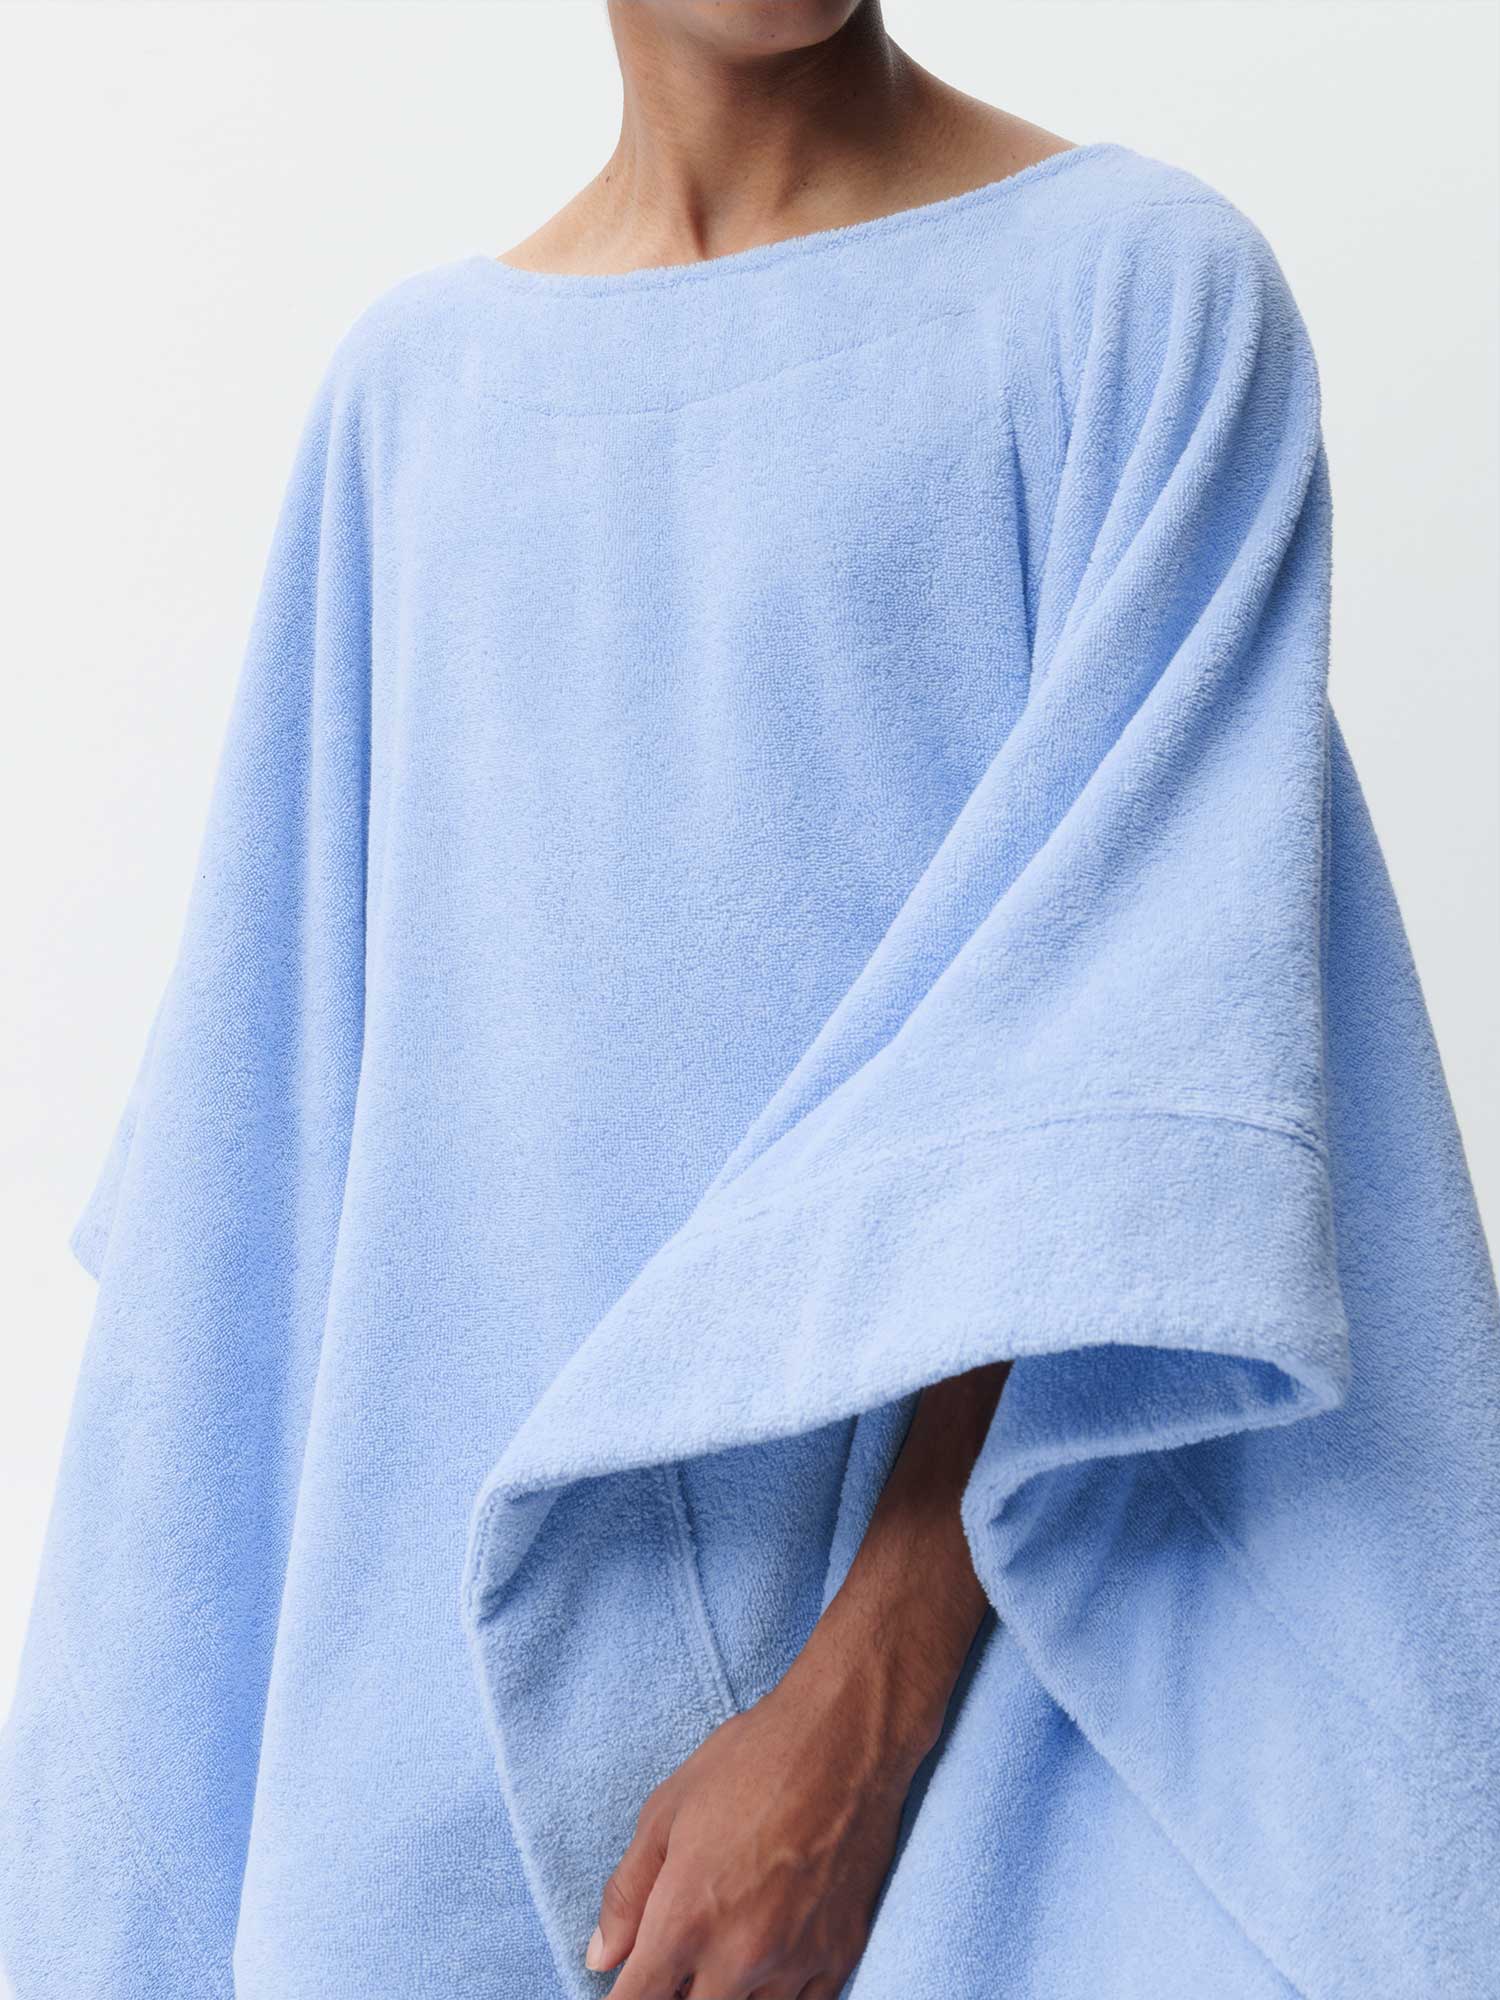 Robert-Rabensteiner-Towelling-Poncho-French-Riviera-Blue-Male-3